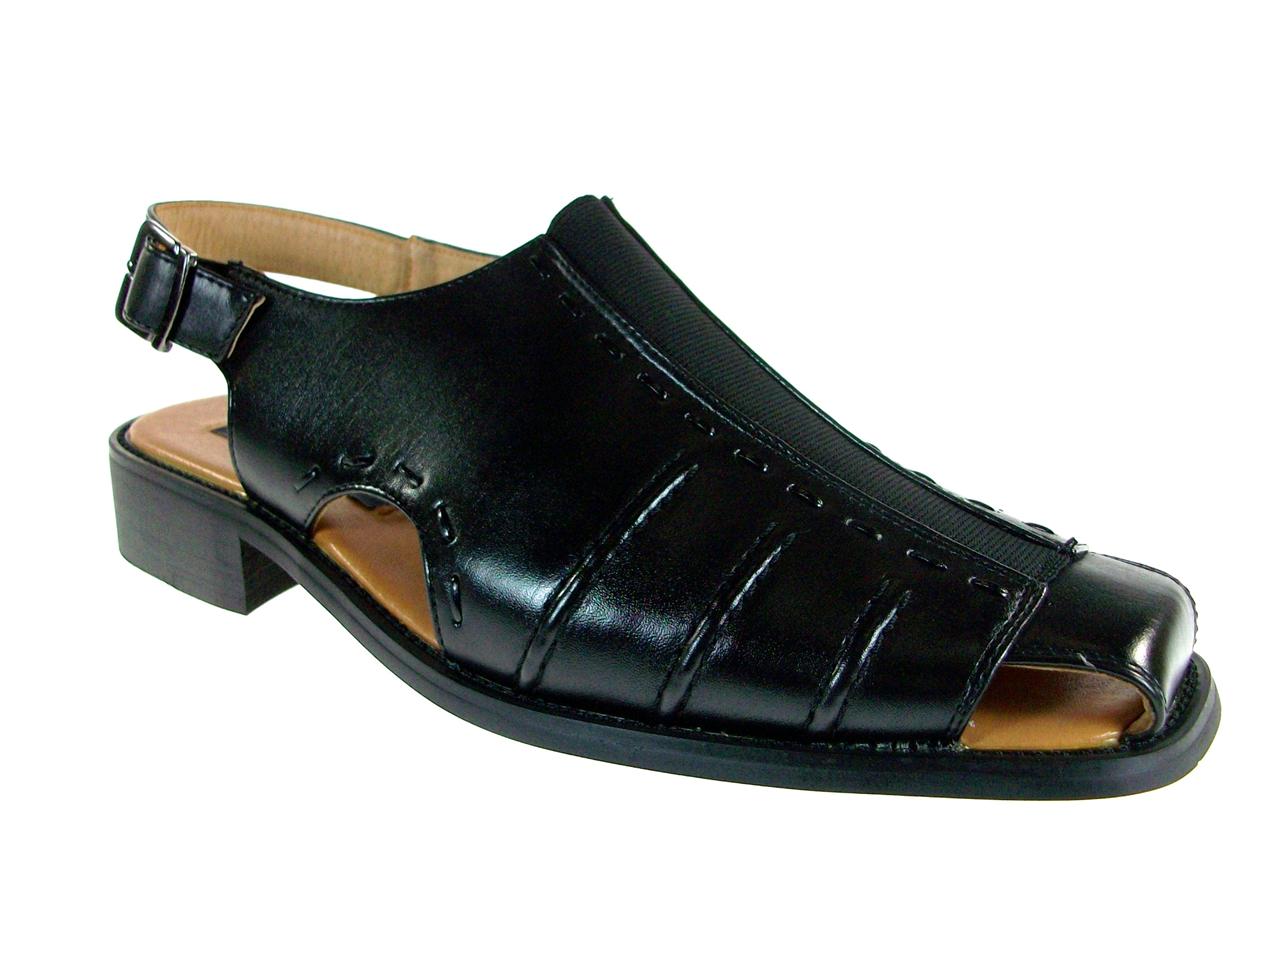 Mens-Fashion-Closed-Toe-Casual-Dress-Shoe-Sandals-w-Leather-Lining ...